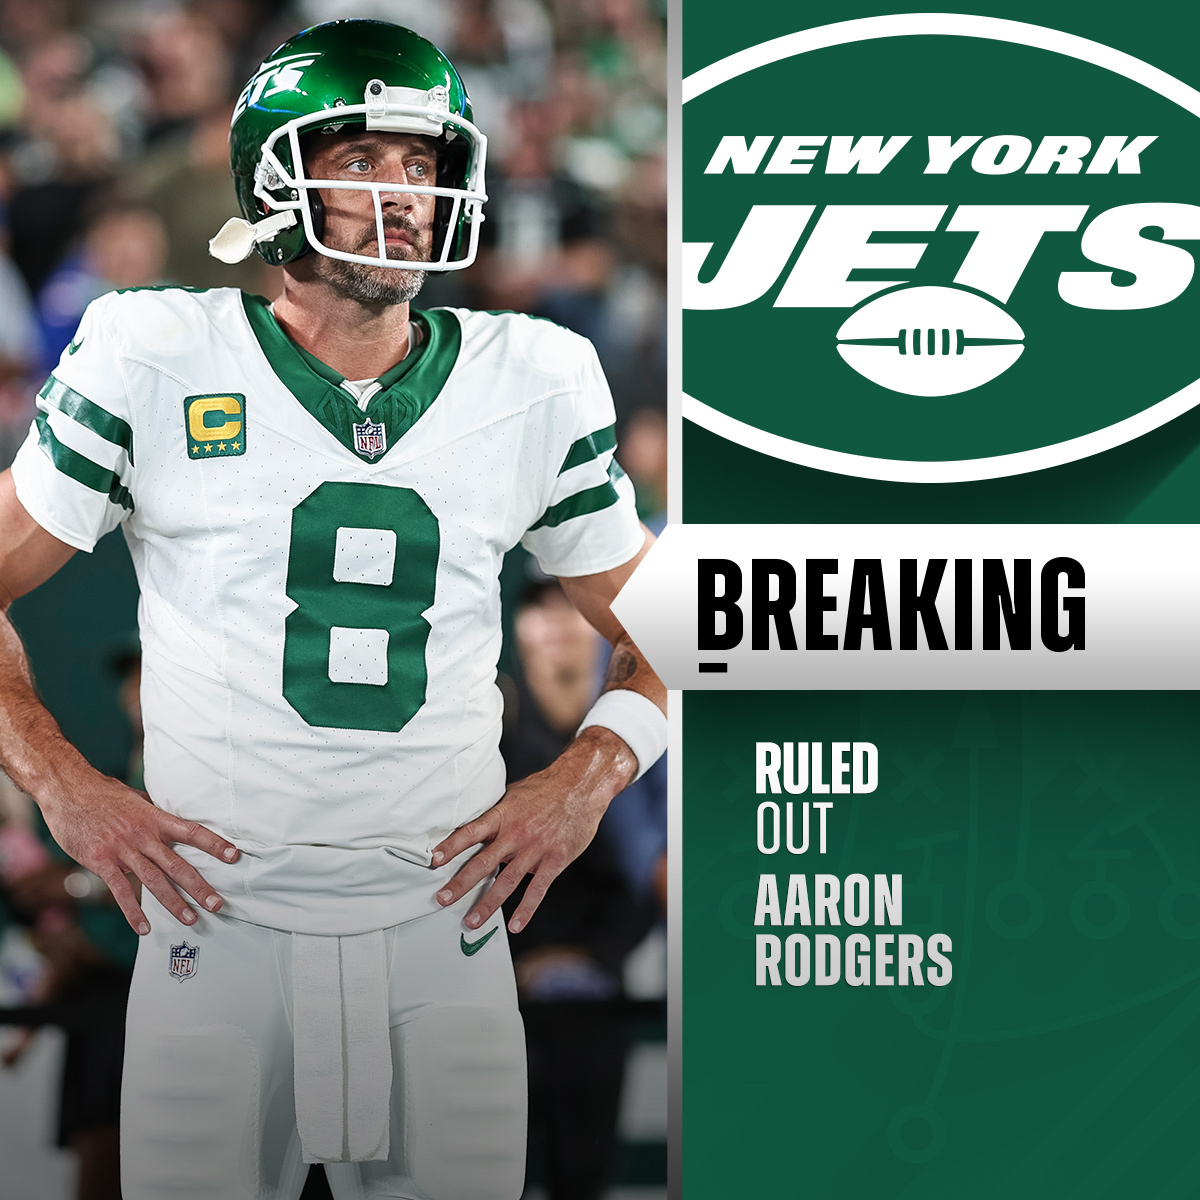 Aaron Rodgers ruled out for remainder of game. #BUFvsNYJ